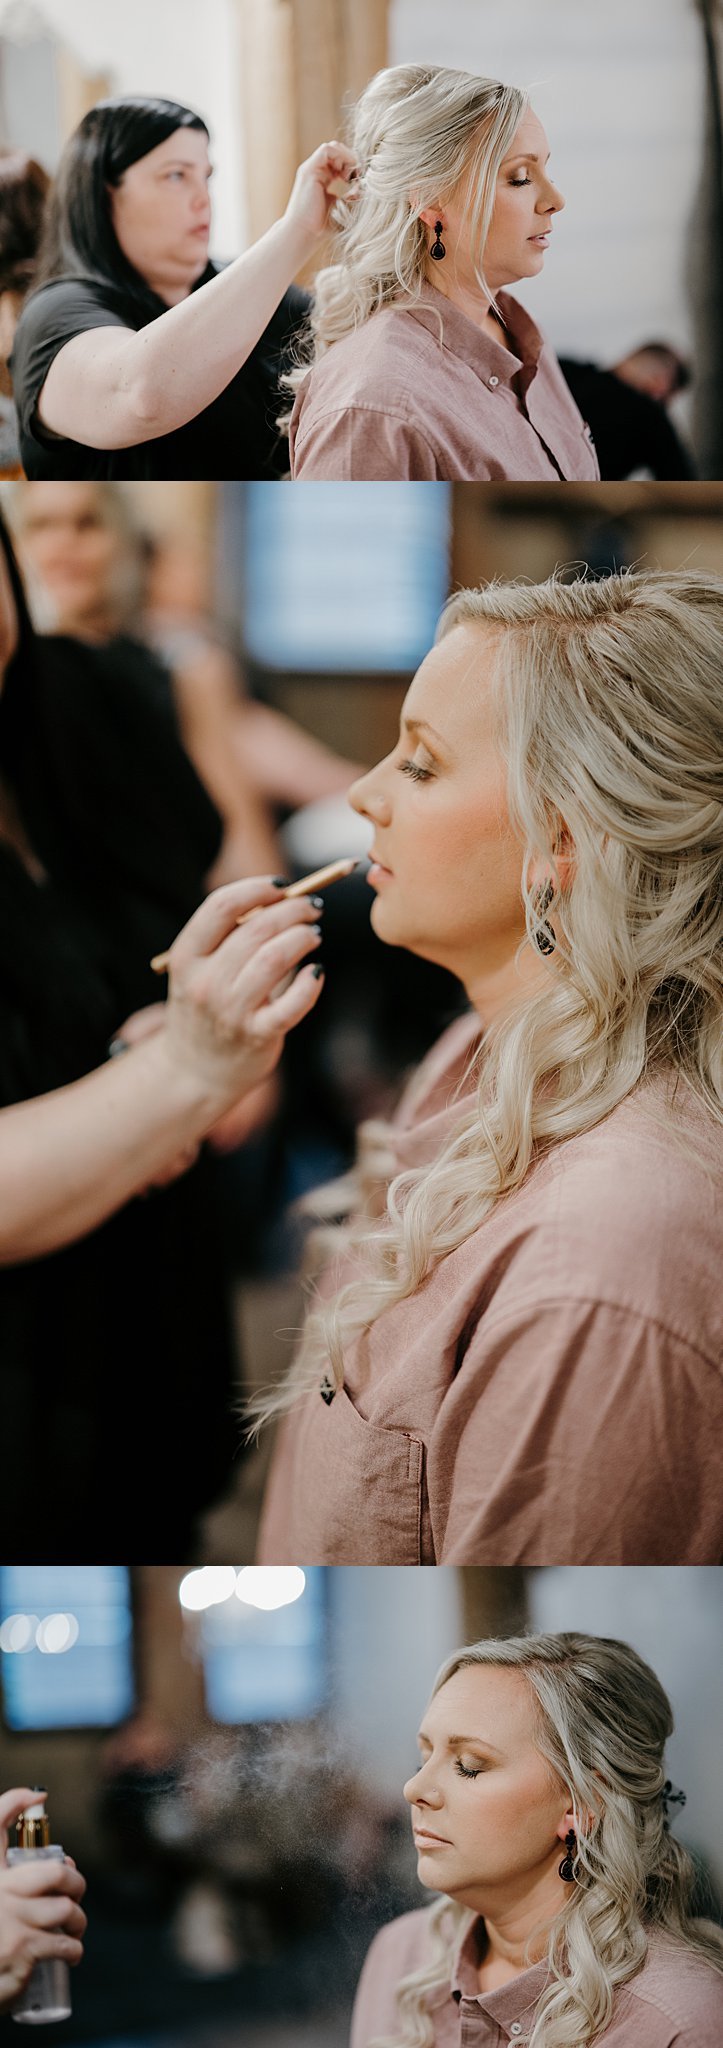 Minneapolis bride gets hair and make up done by professional